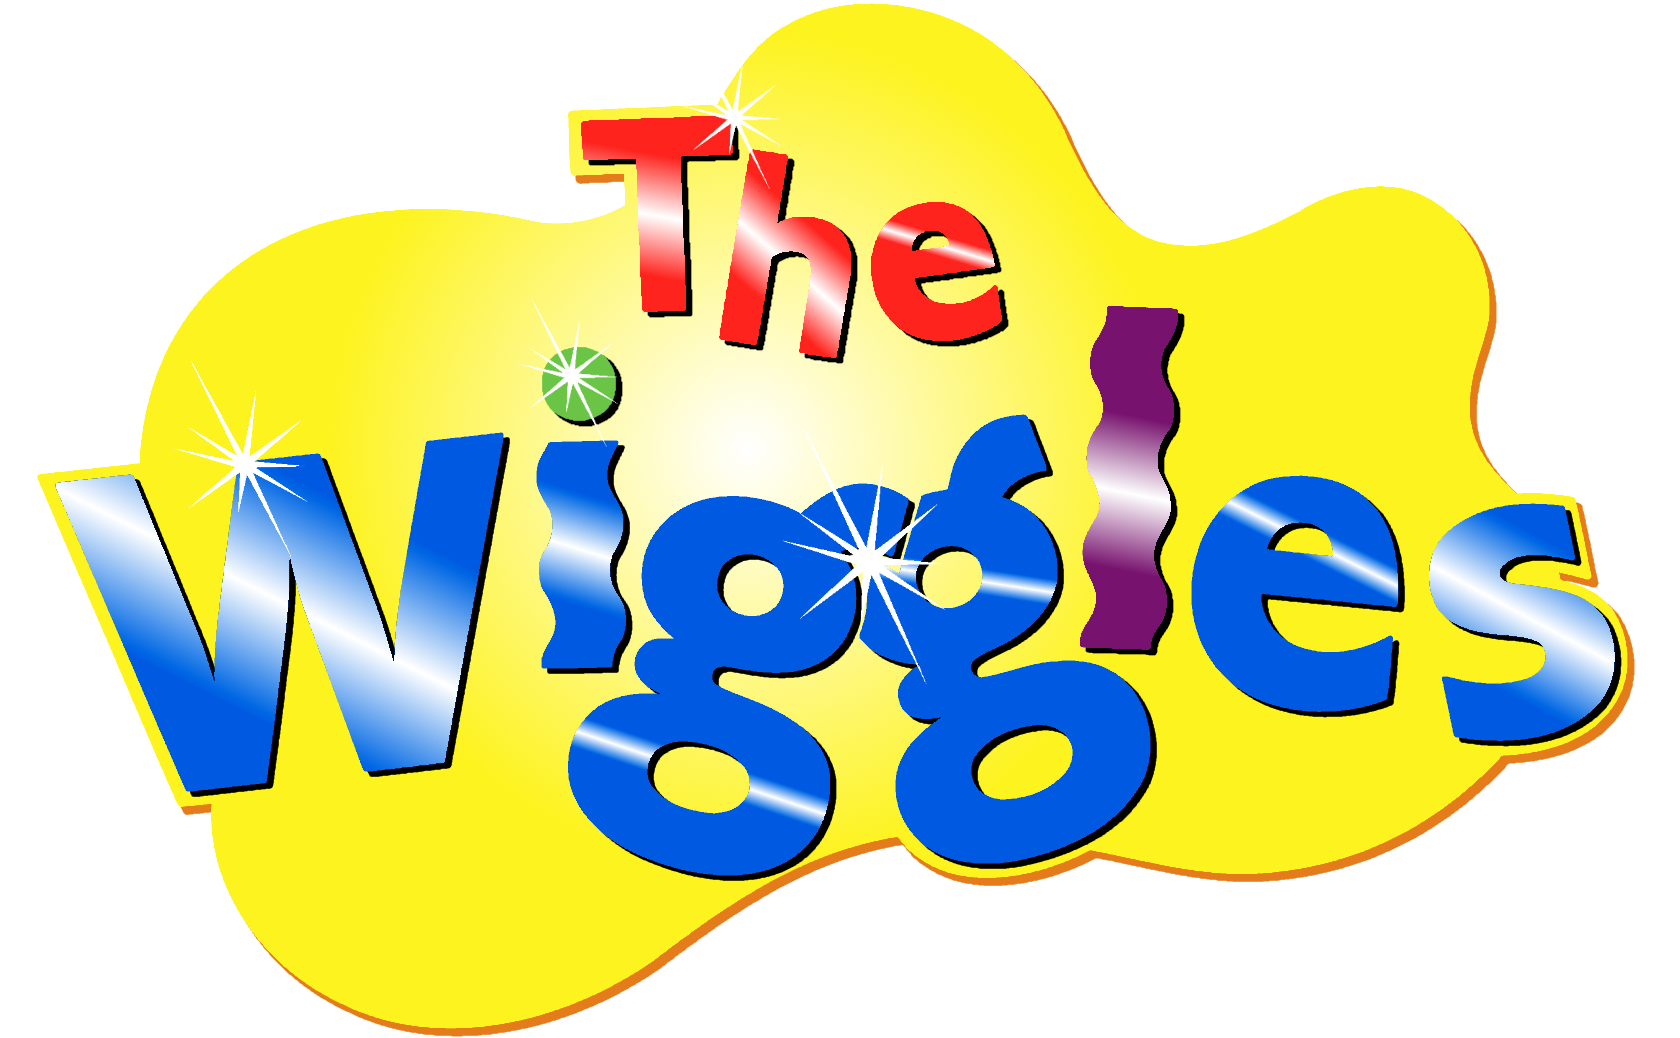 The Wiggles Sparkle Variant Logo 2000 2003 By Josiahokeefe On Deviantart